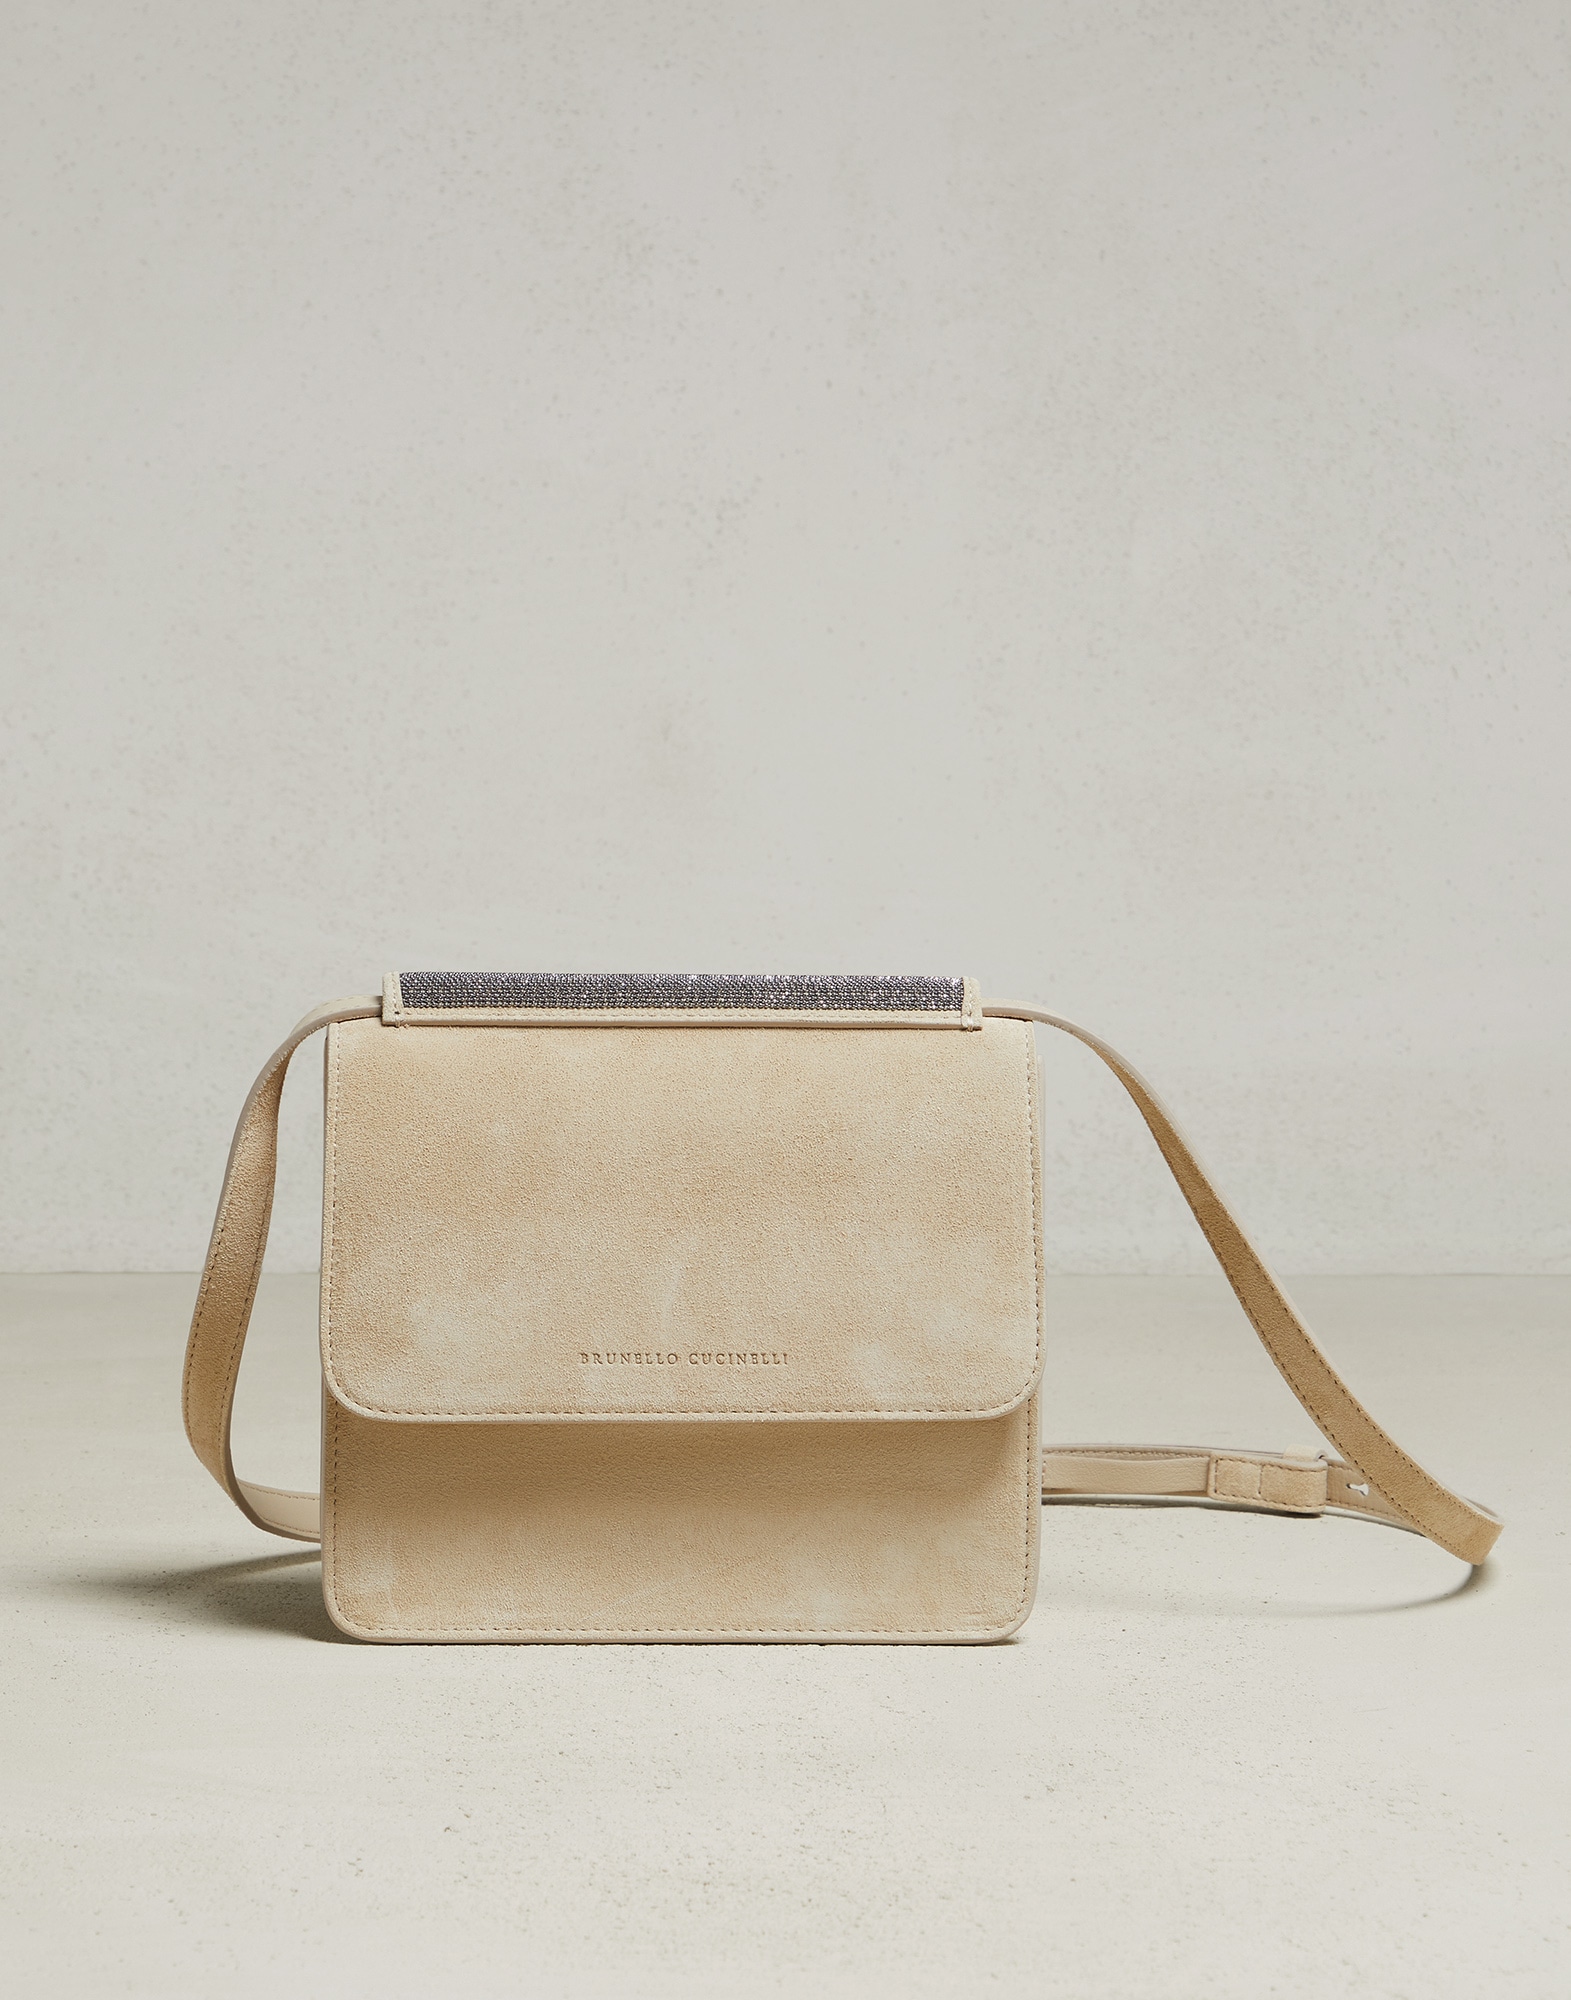 Brunello Cucinelli Suede Cross-body Bag in Khaki Womens Bags Crossbody bags and purses Natural 